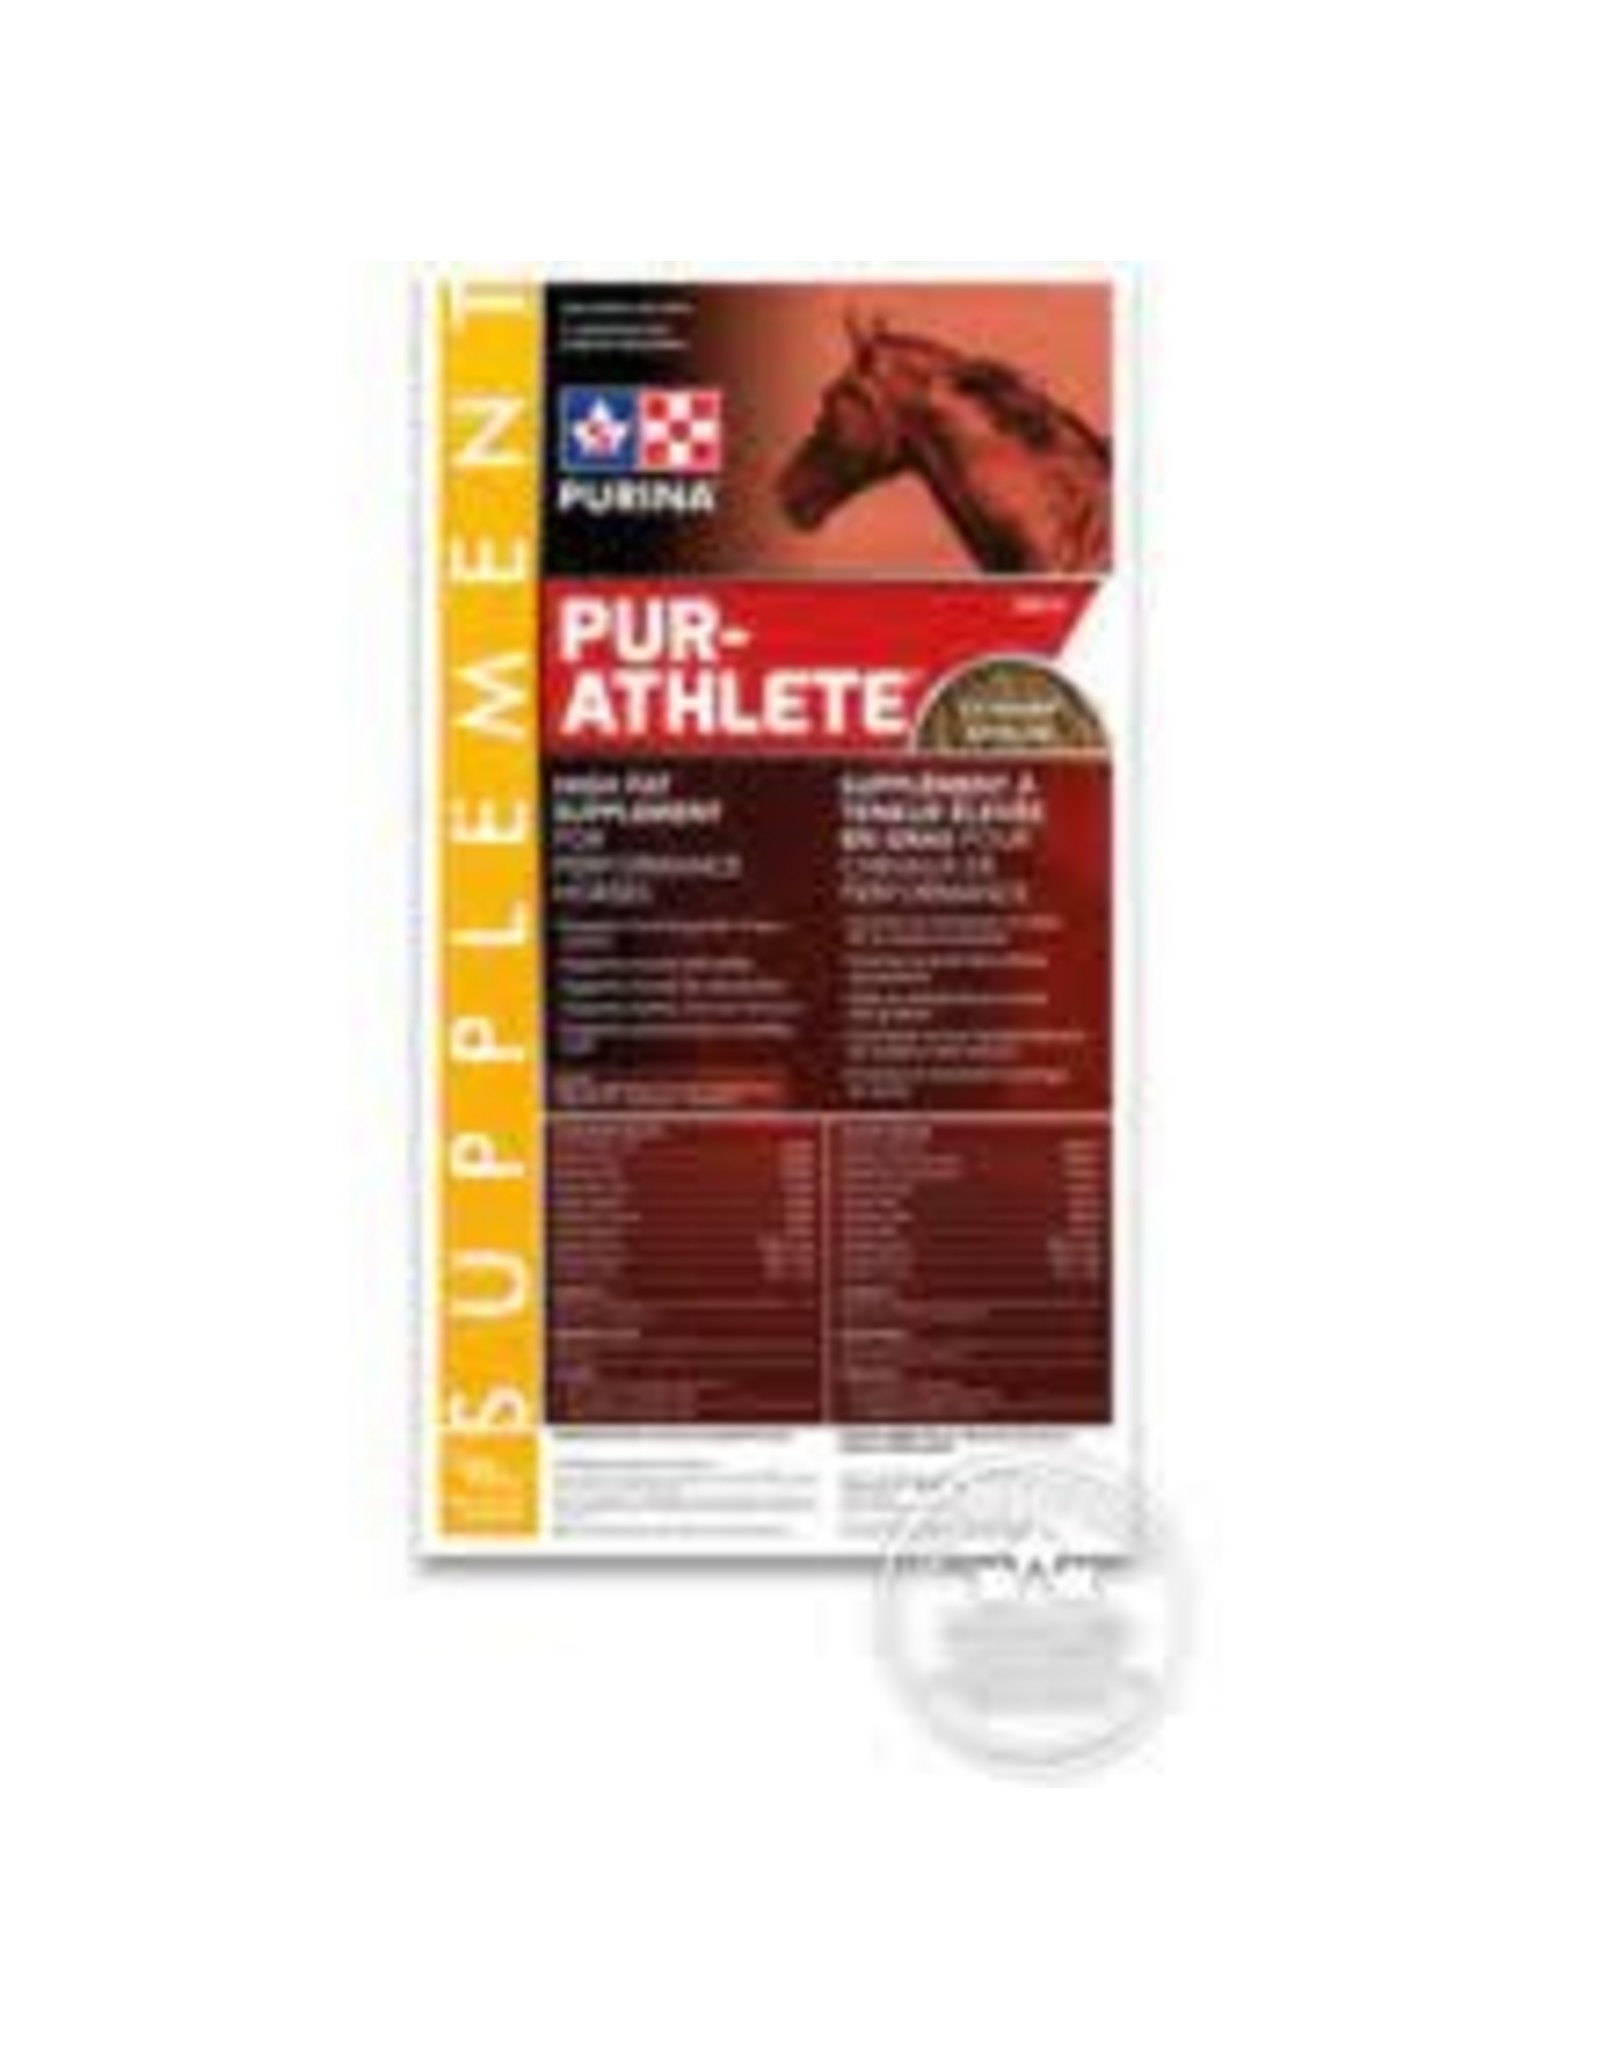 Purina PURINA PUR - ATHLETE SUPPLEMENT 20kg  -  CP35810 - NSC 15% Max - CP 20%, Fat 27%, Fiber 4.0% -   An extruded fat supplement containing vegetable oil and flaxseed -  Formulated to provide added energy and nutrients for performance horses. - IN STORE